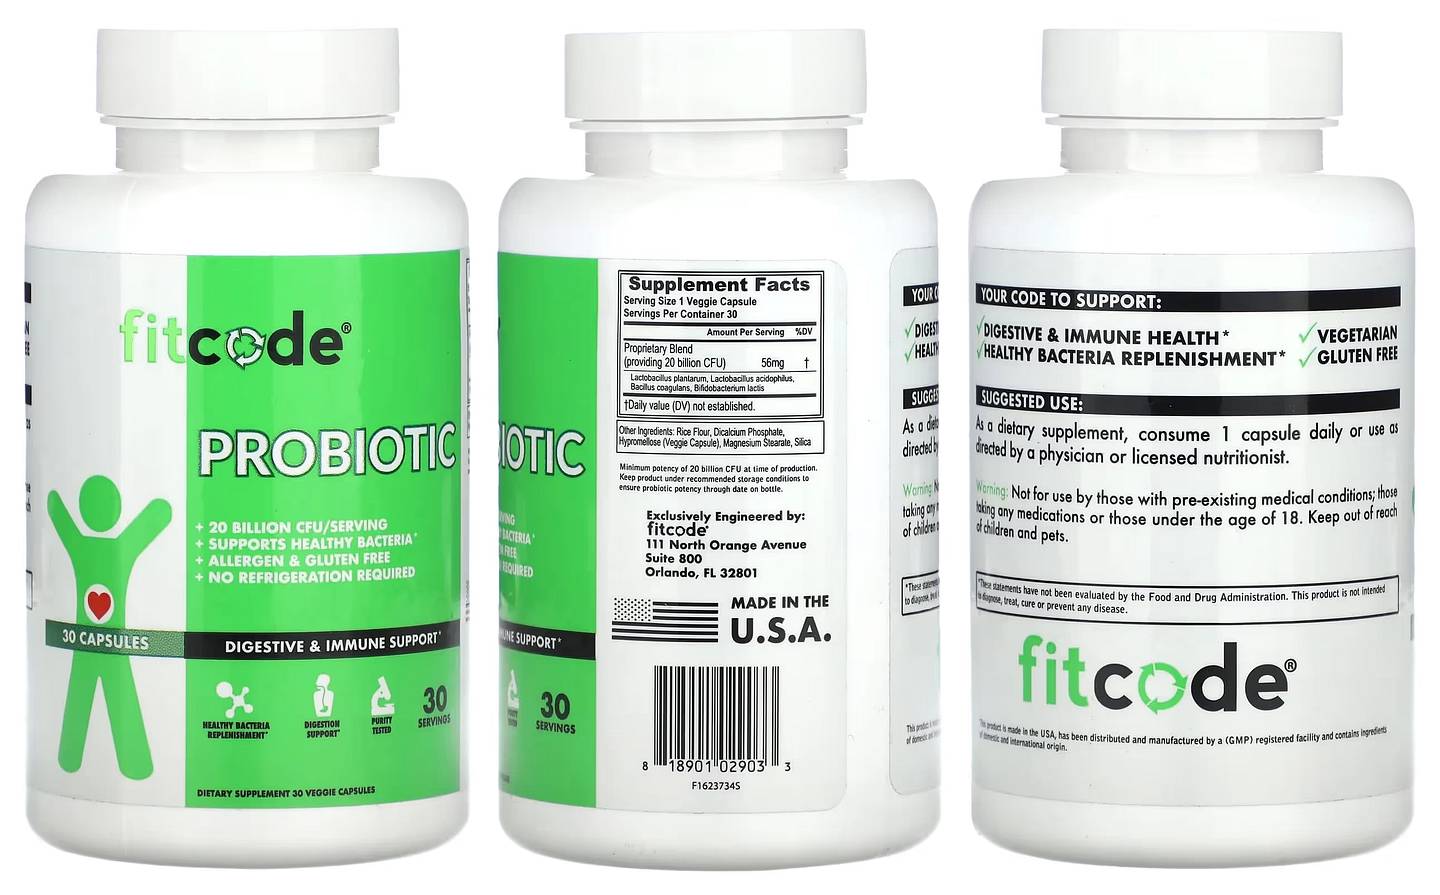 fitcode, Probiotic packaging